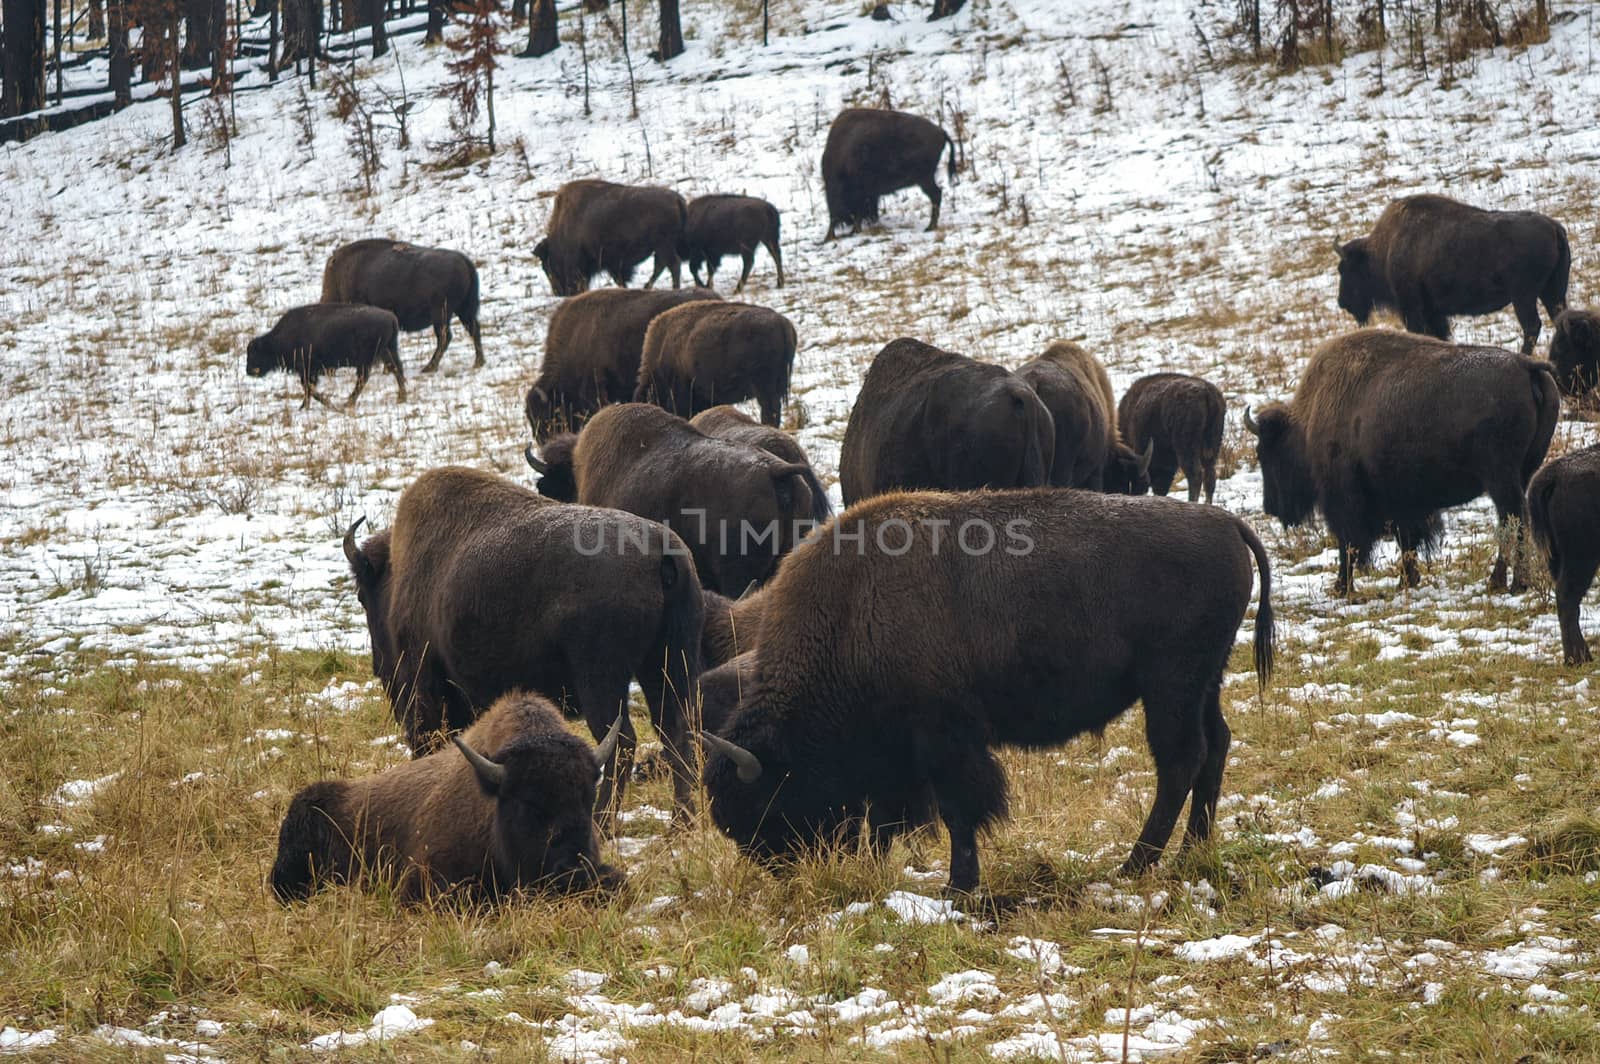 Bison in the Snow by emattil